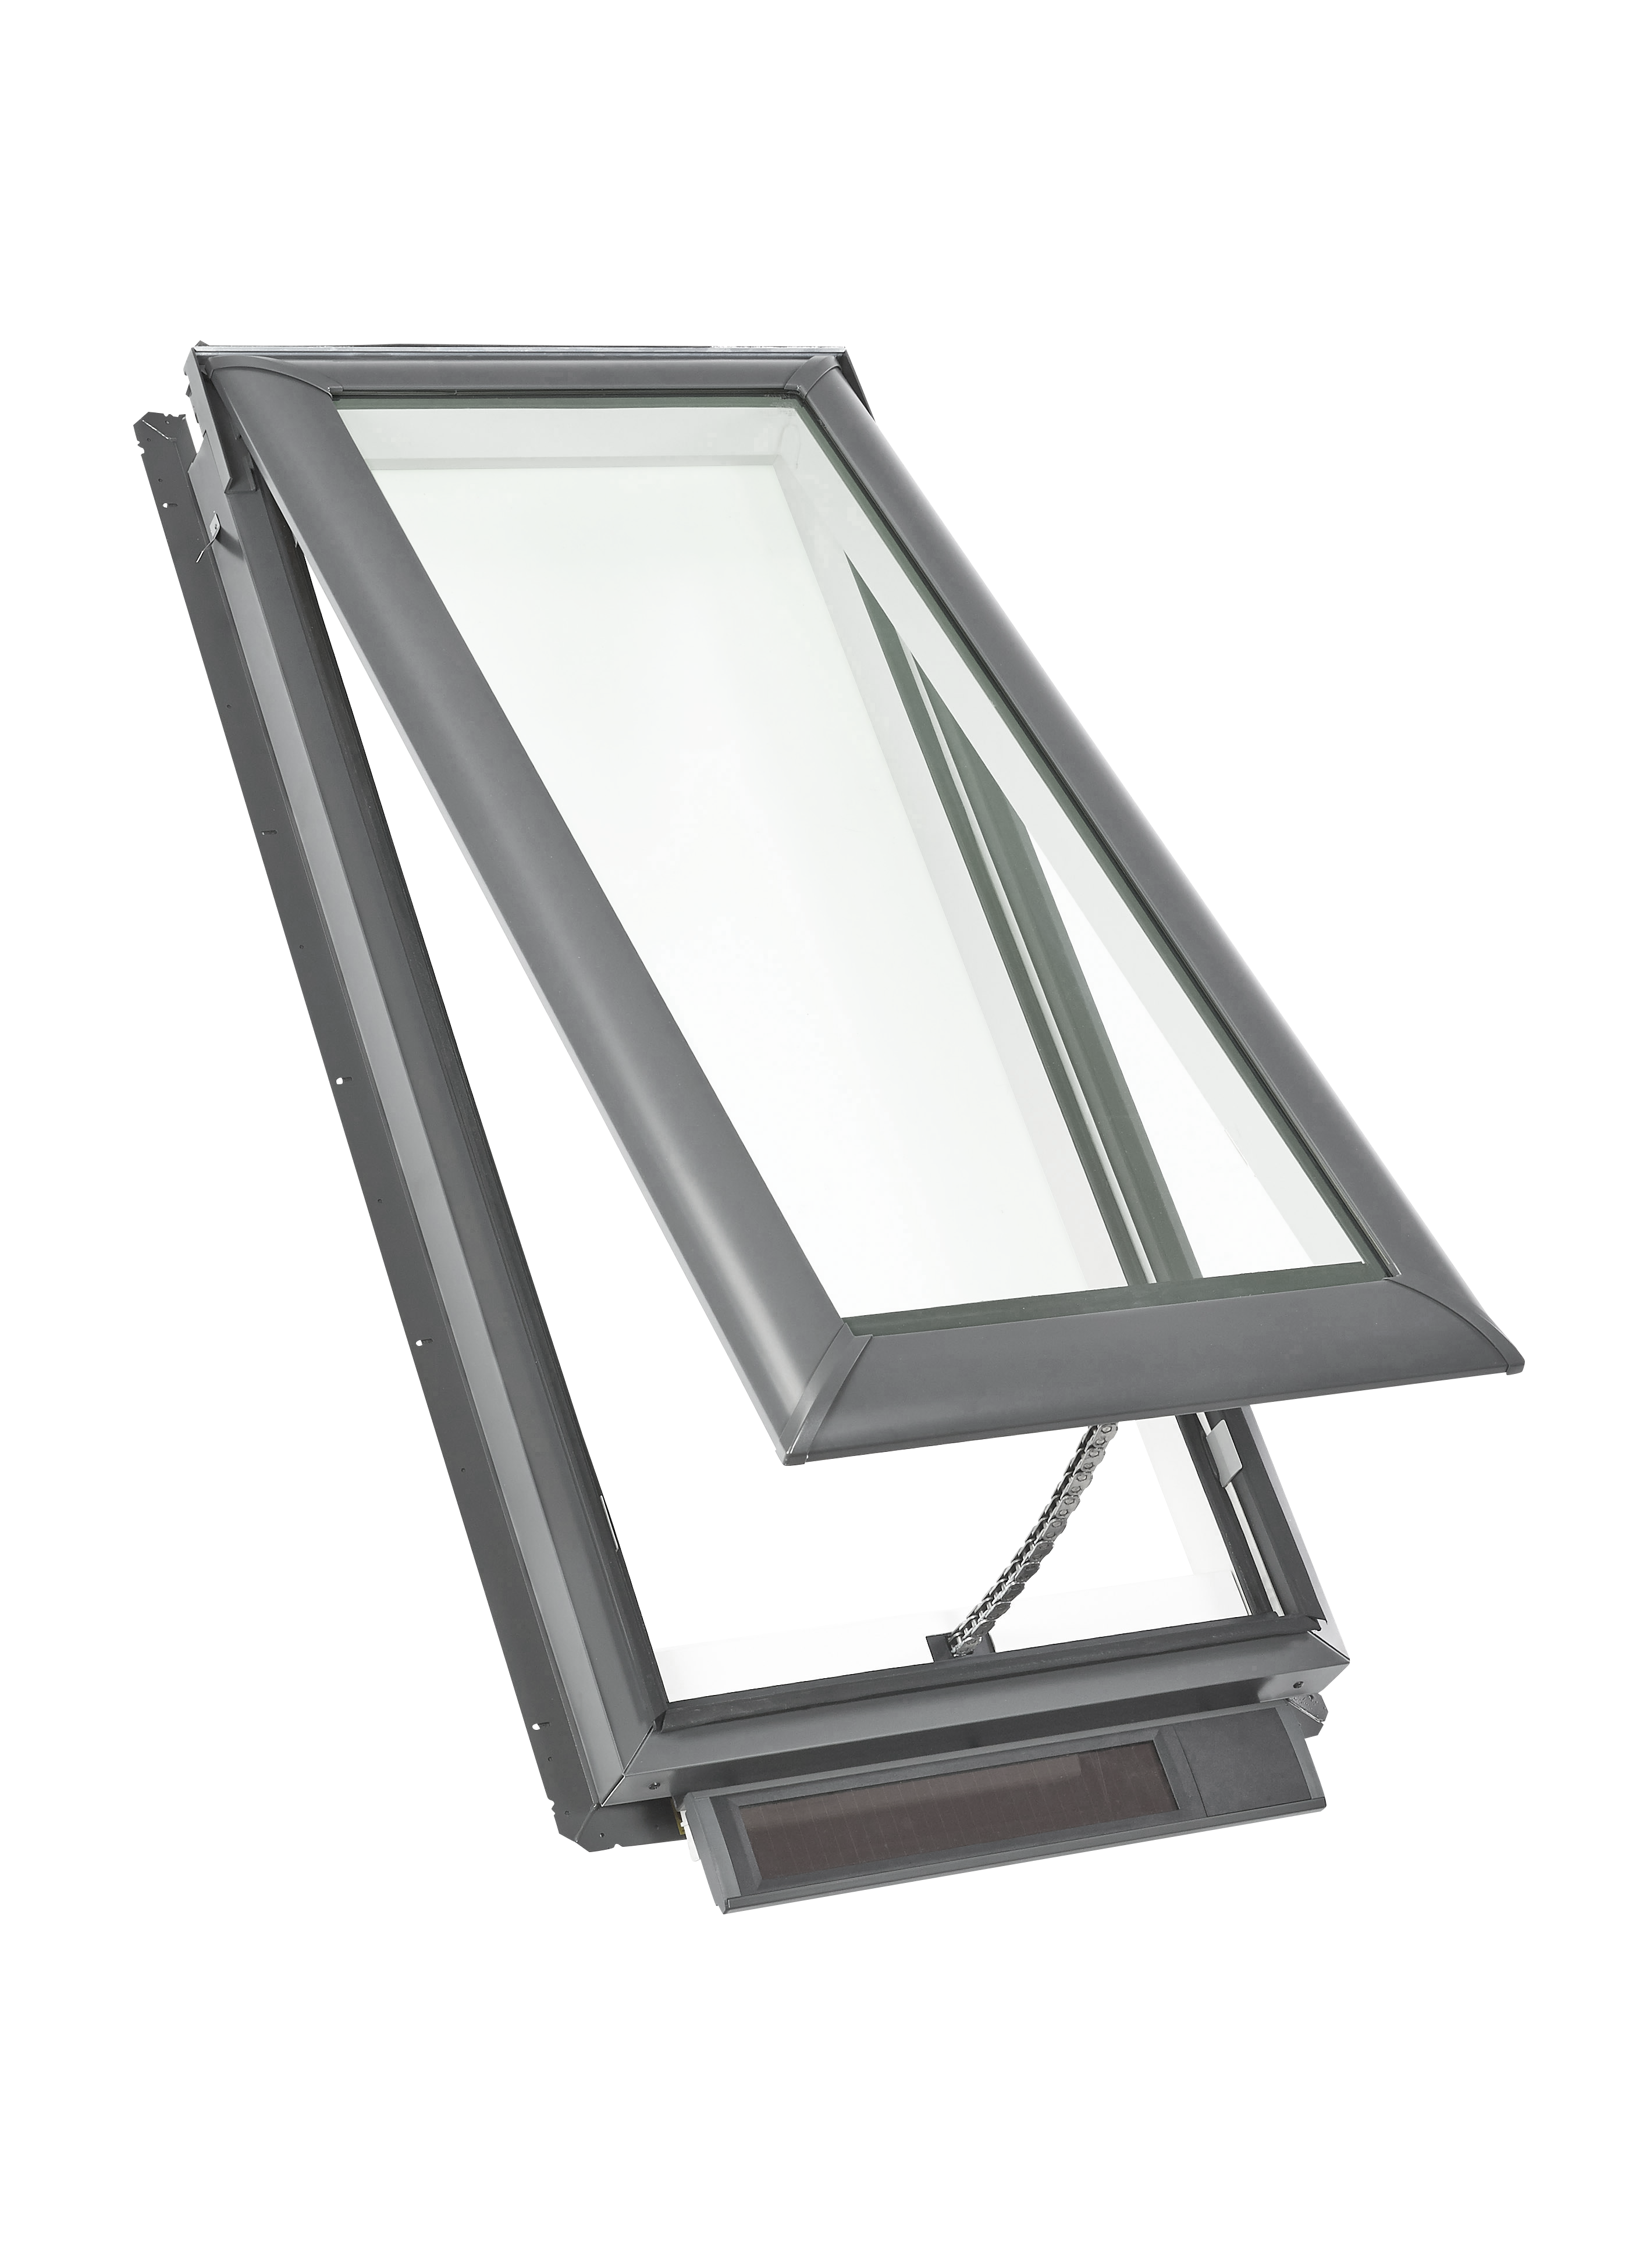 VELUX Skylights by Specialty Home Products Specialty Home Products, Inc. Spokane (509)534-8372